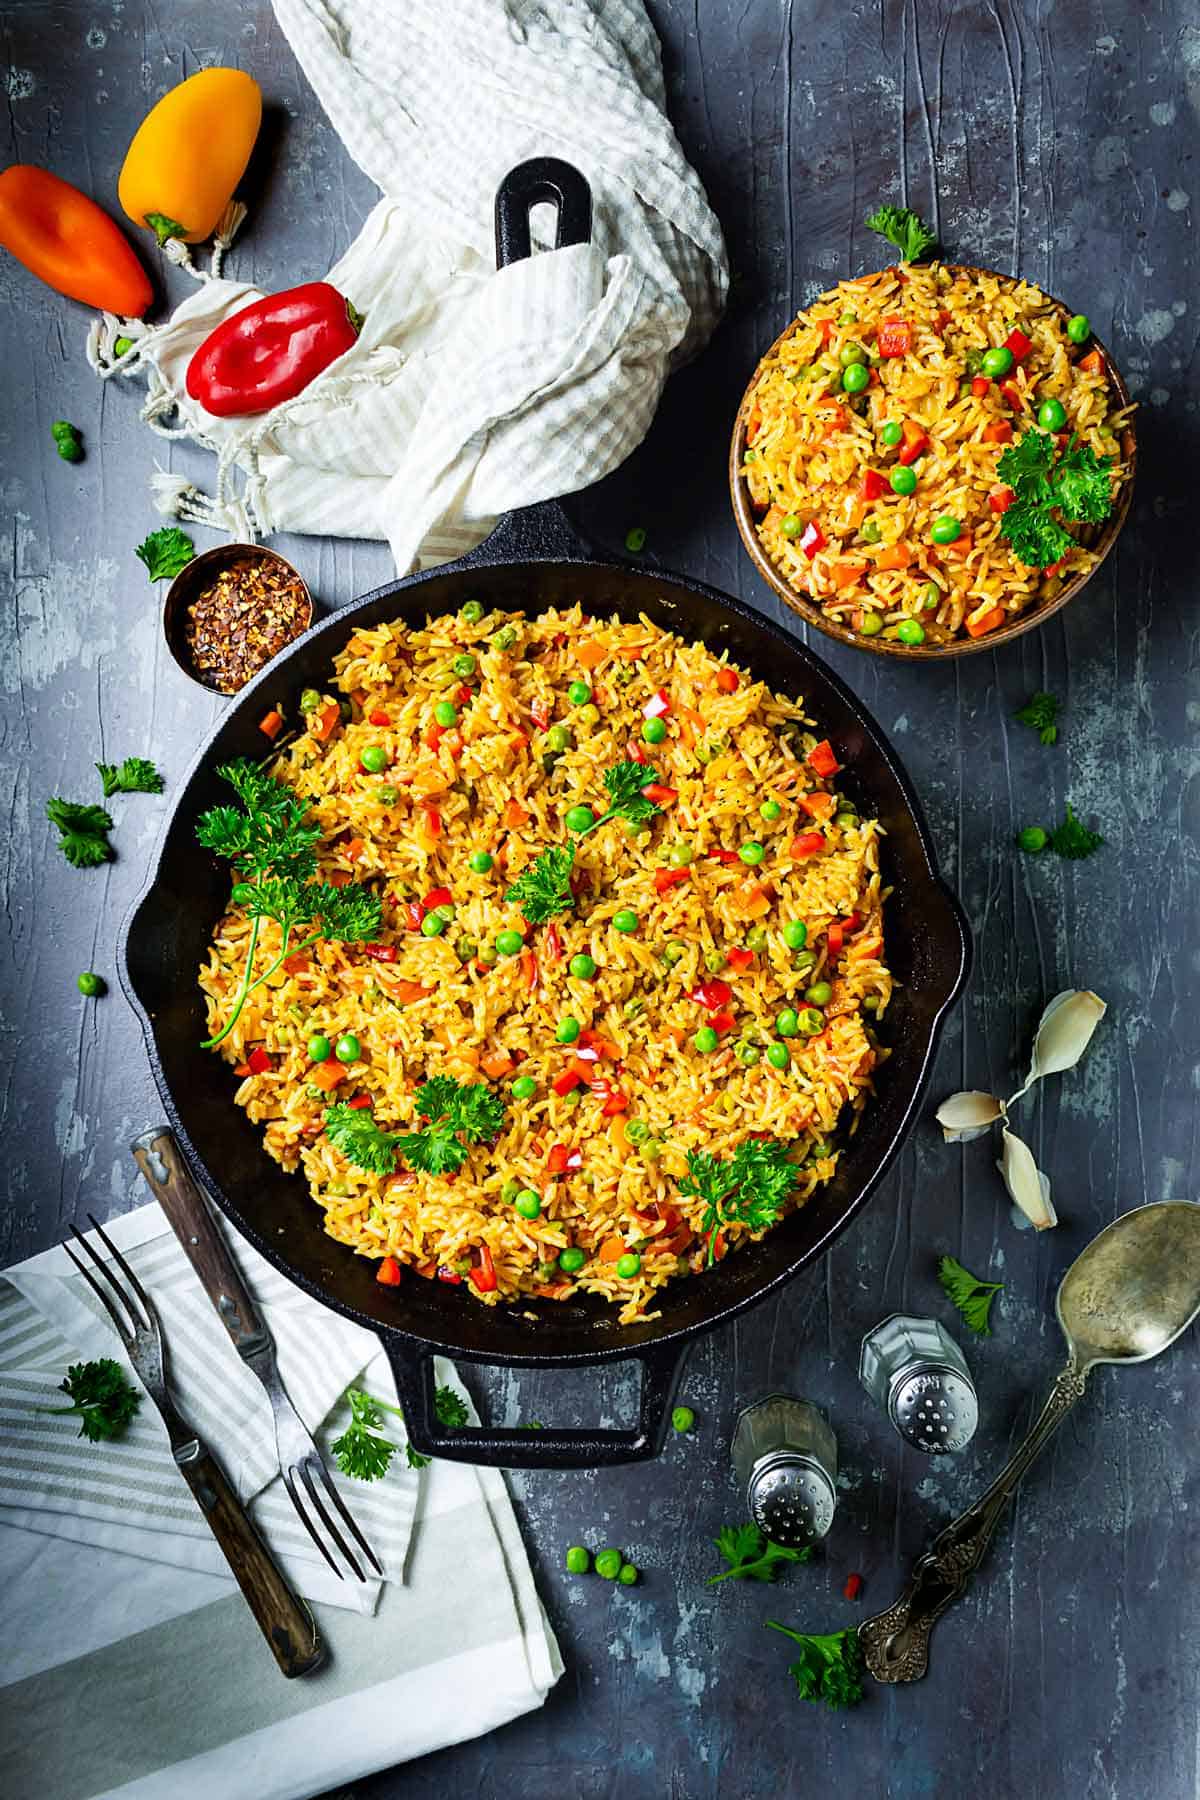 Mixed vegetable rice djuvec in a cast-iron skillet and a bowl on the table.